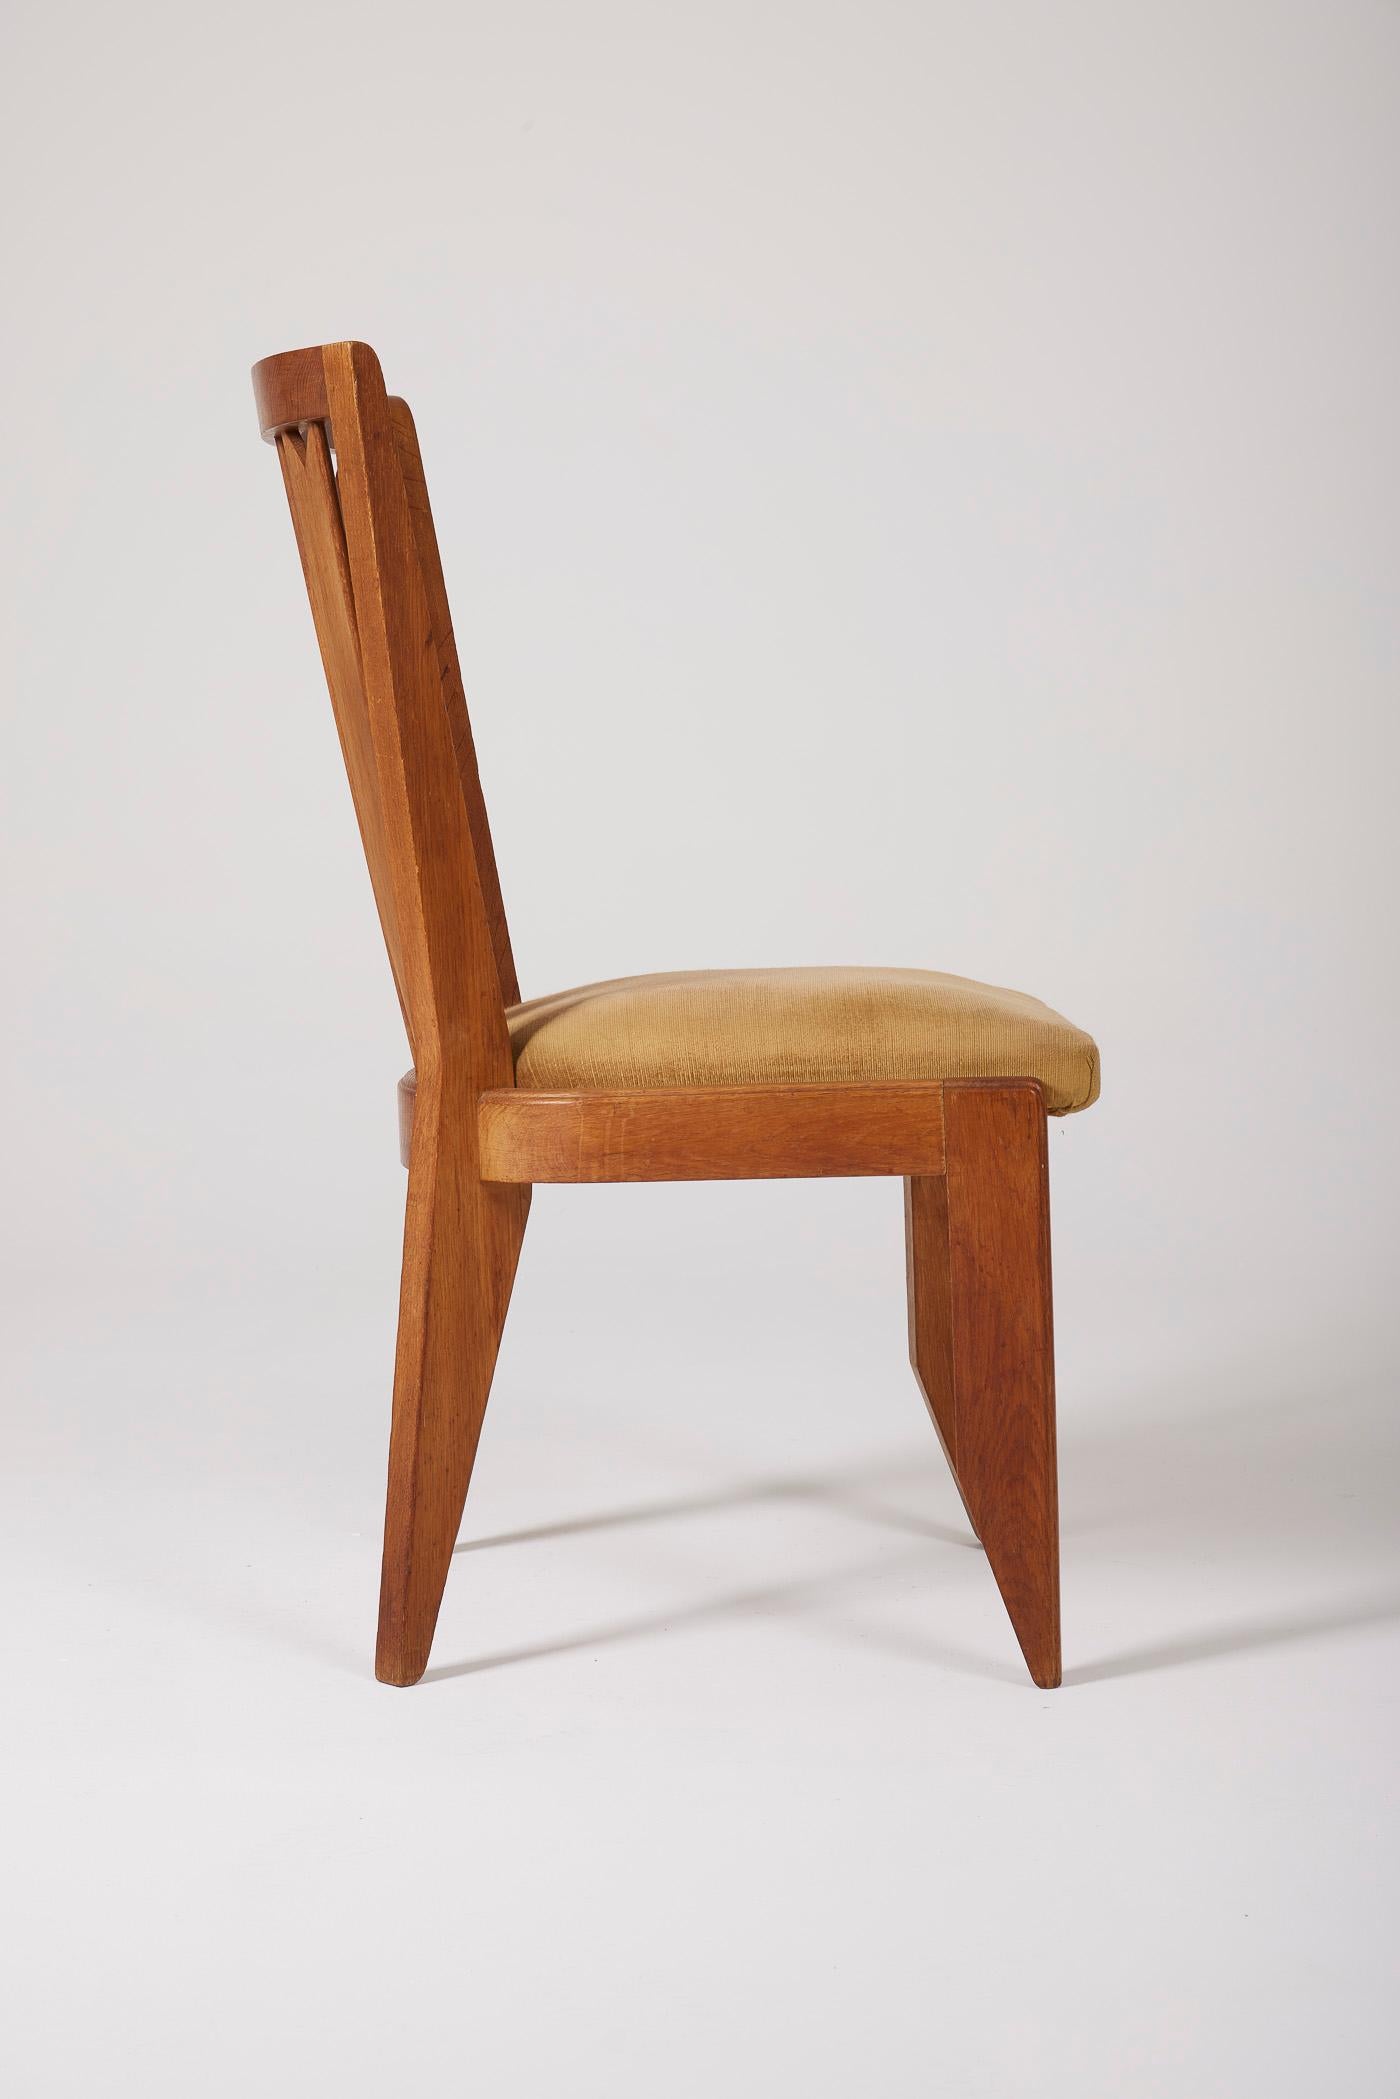 Wood Guillerme & Chambron chair For Sale